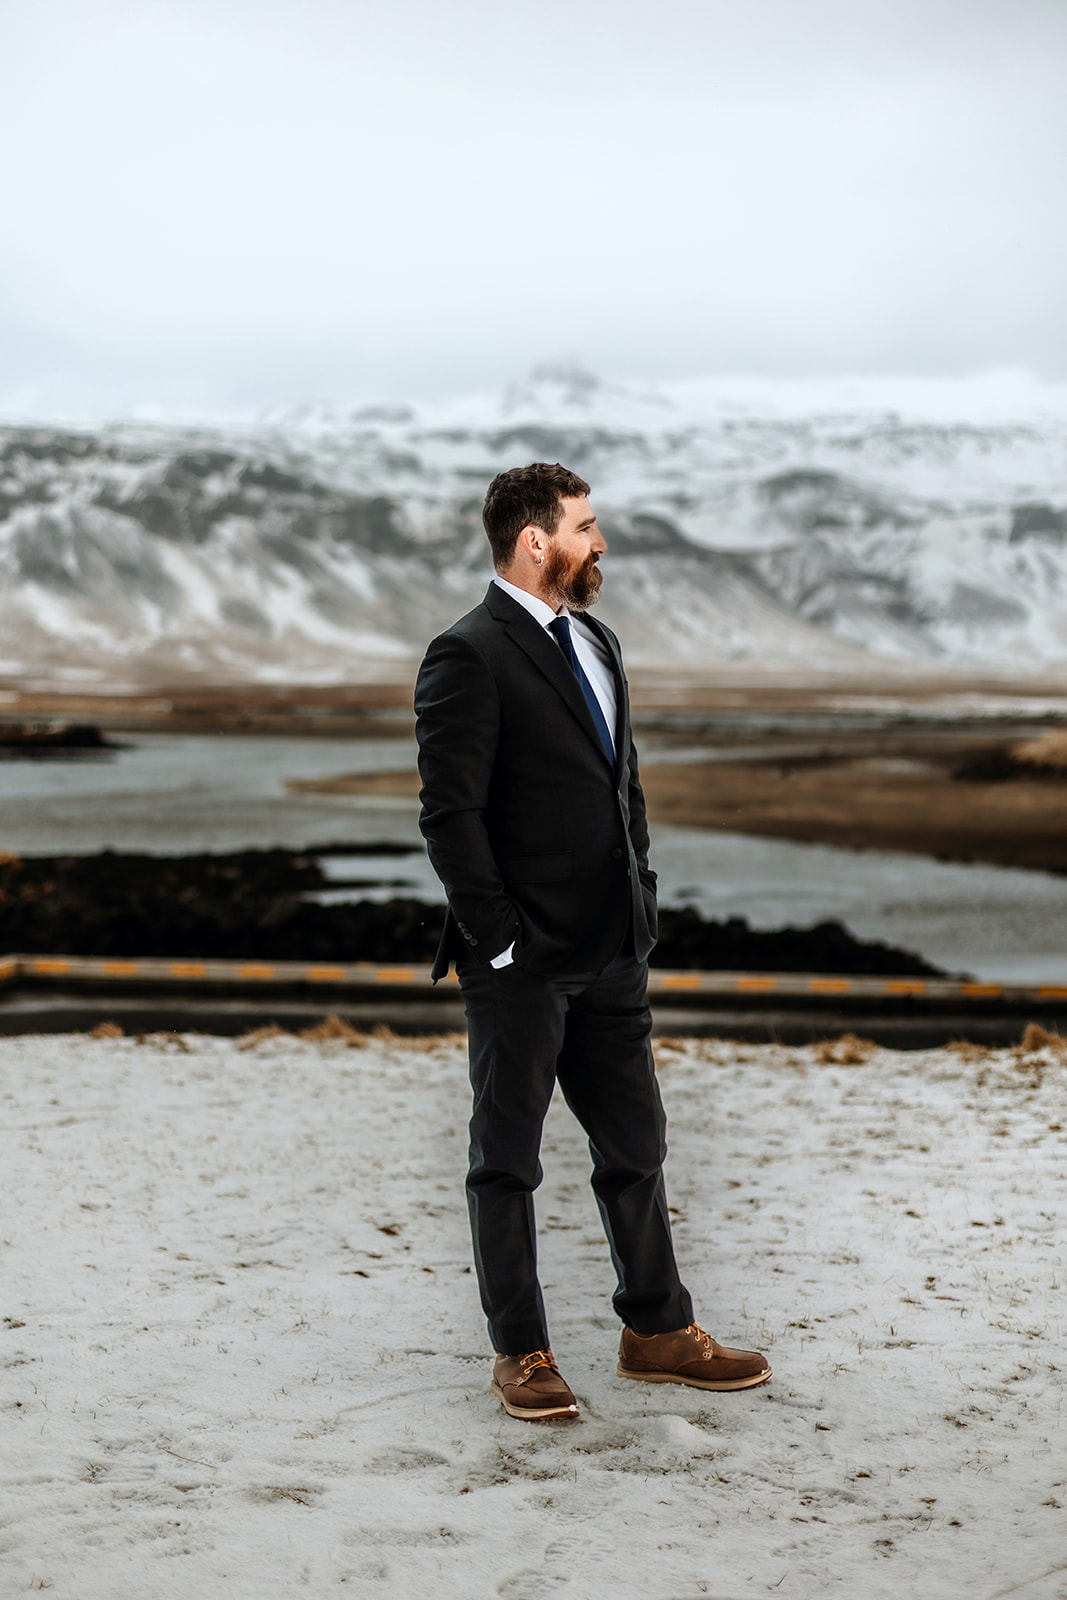 Wedding photography in the snowy winter landscape with mountains in Iceland